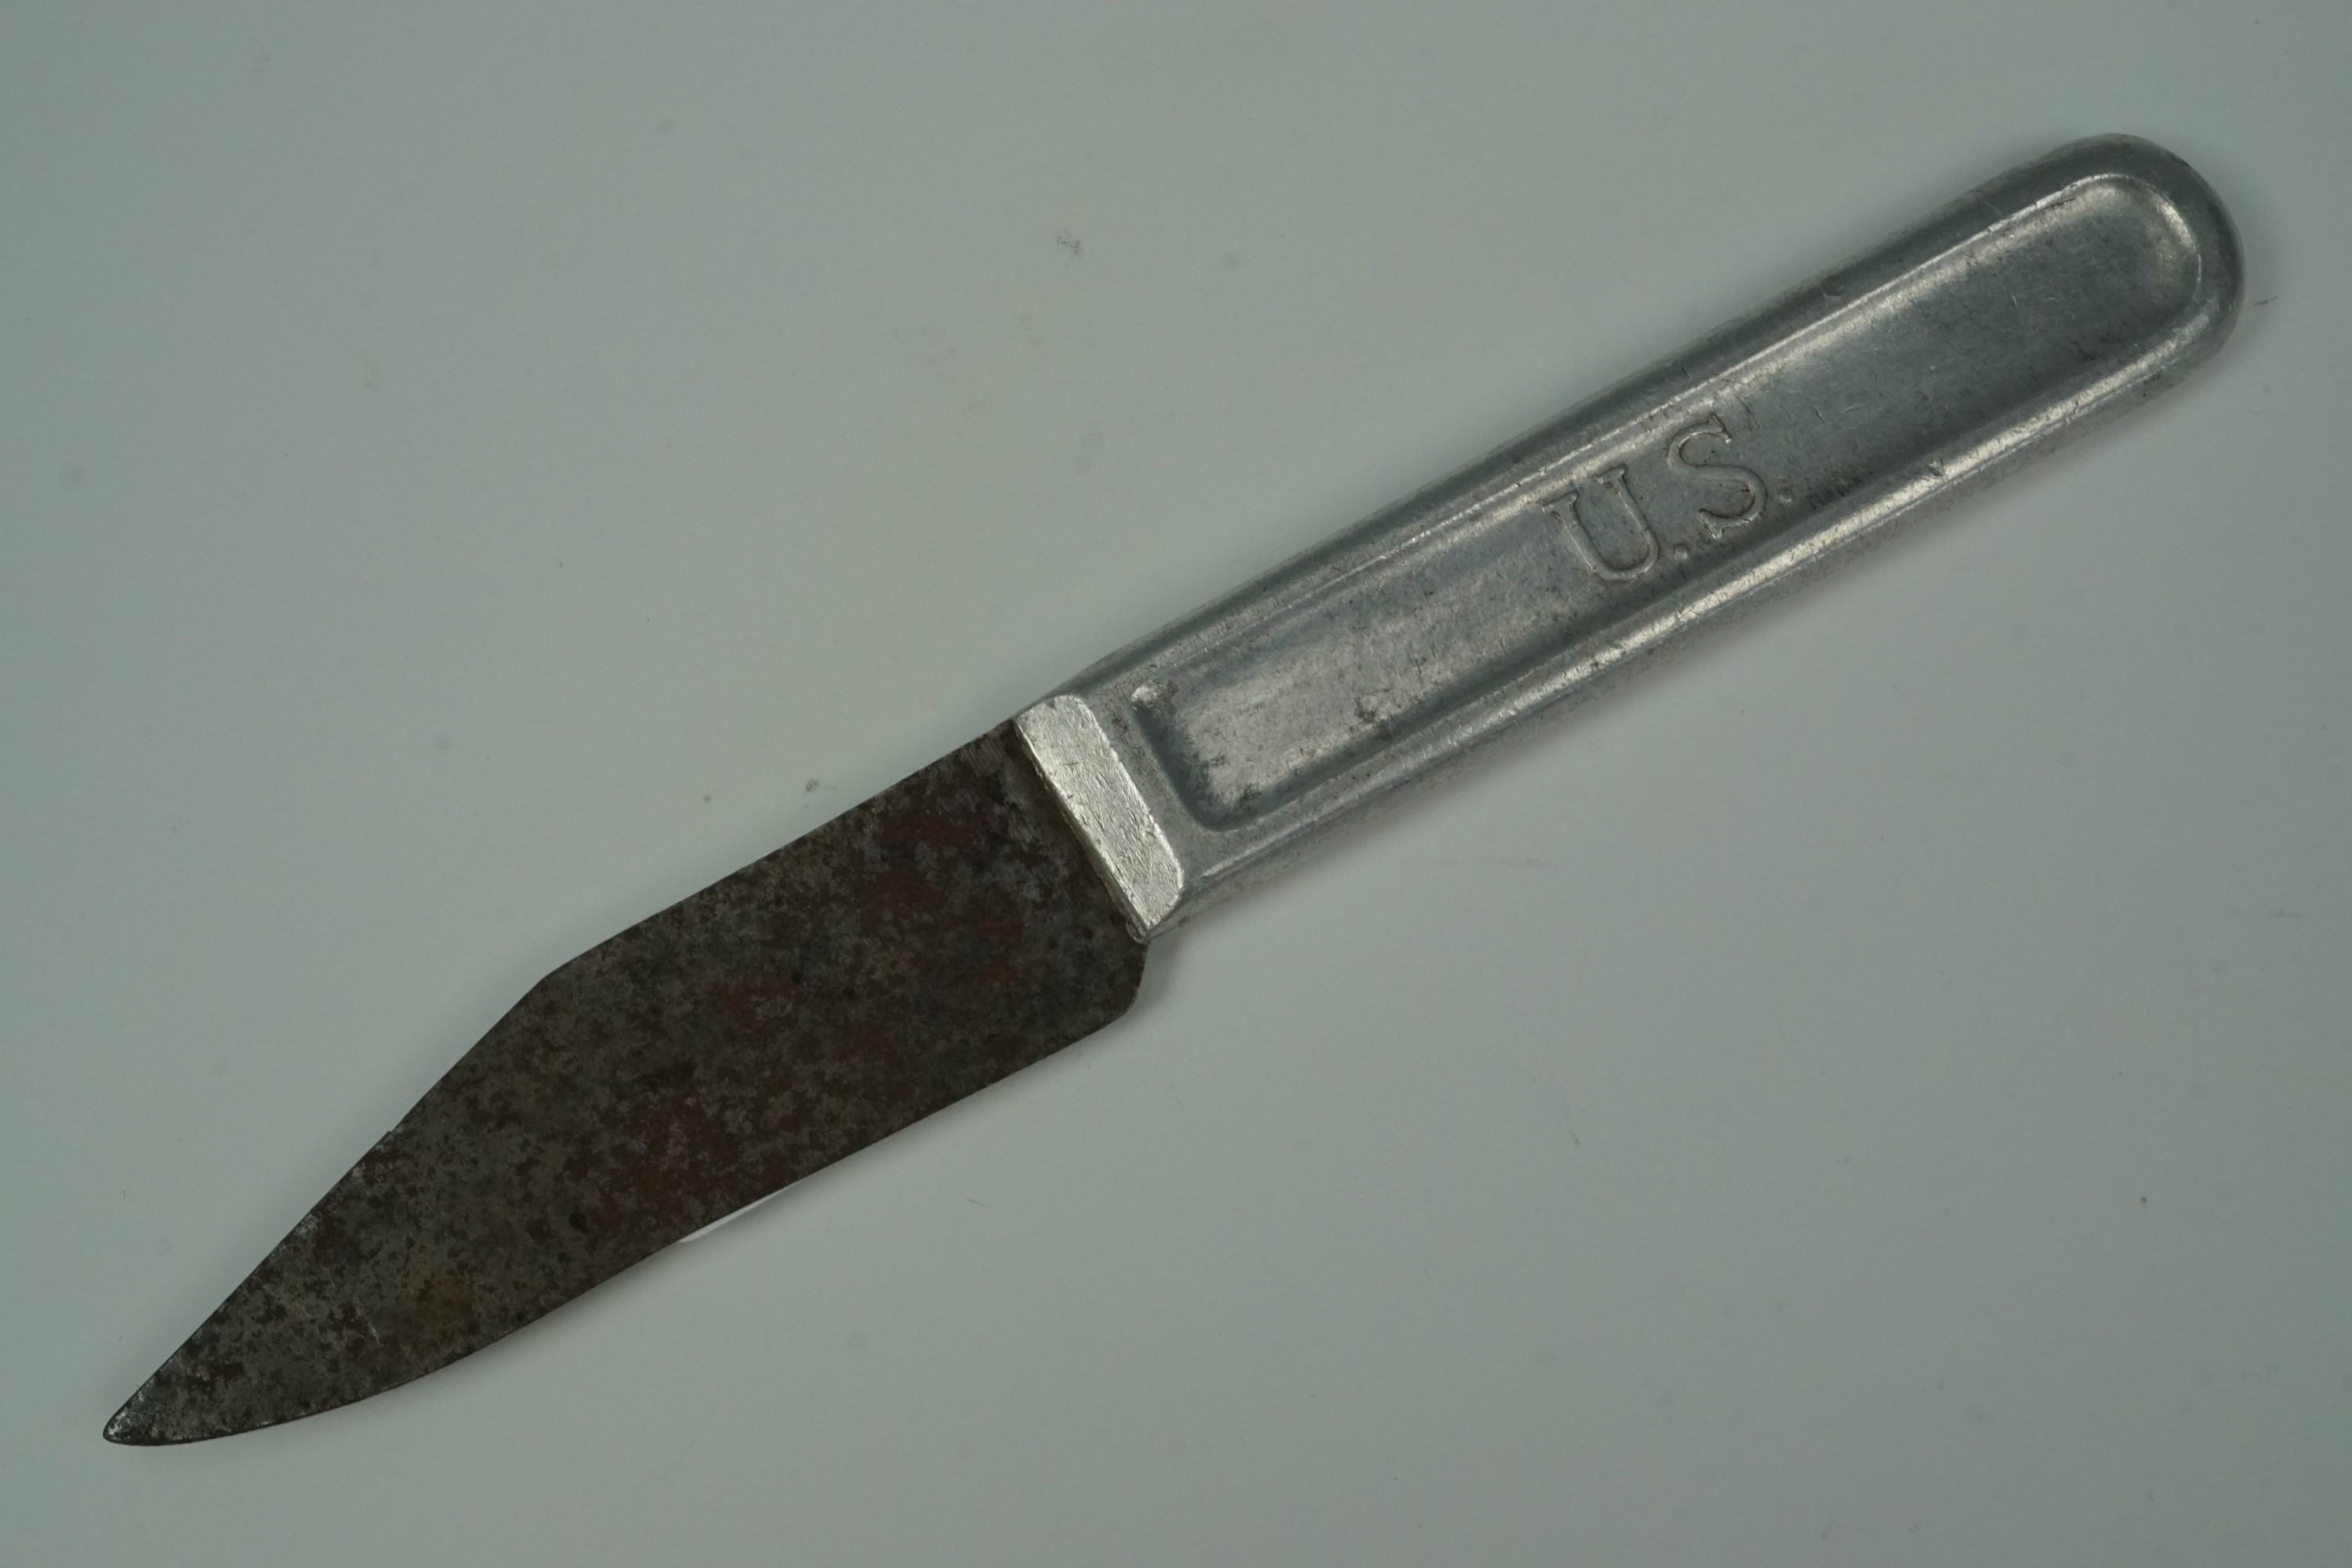 A 1917 US Army cutlery knife, with re-profiled blade